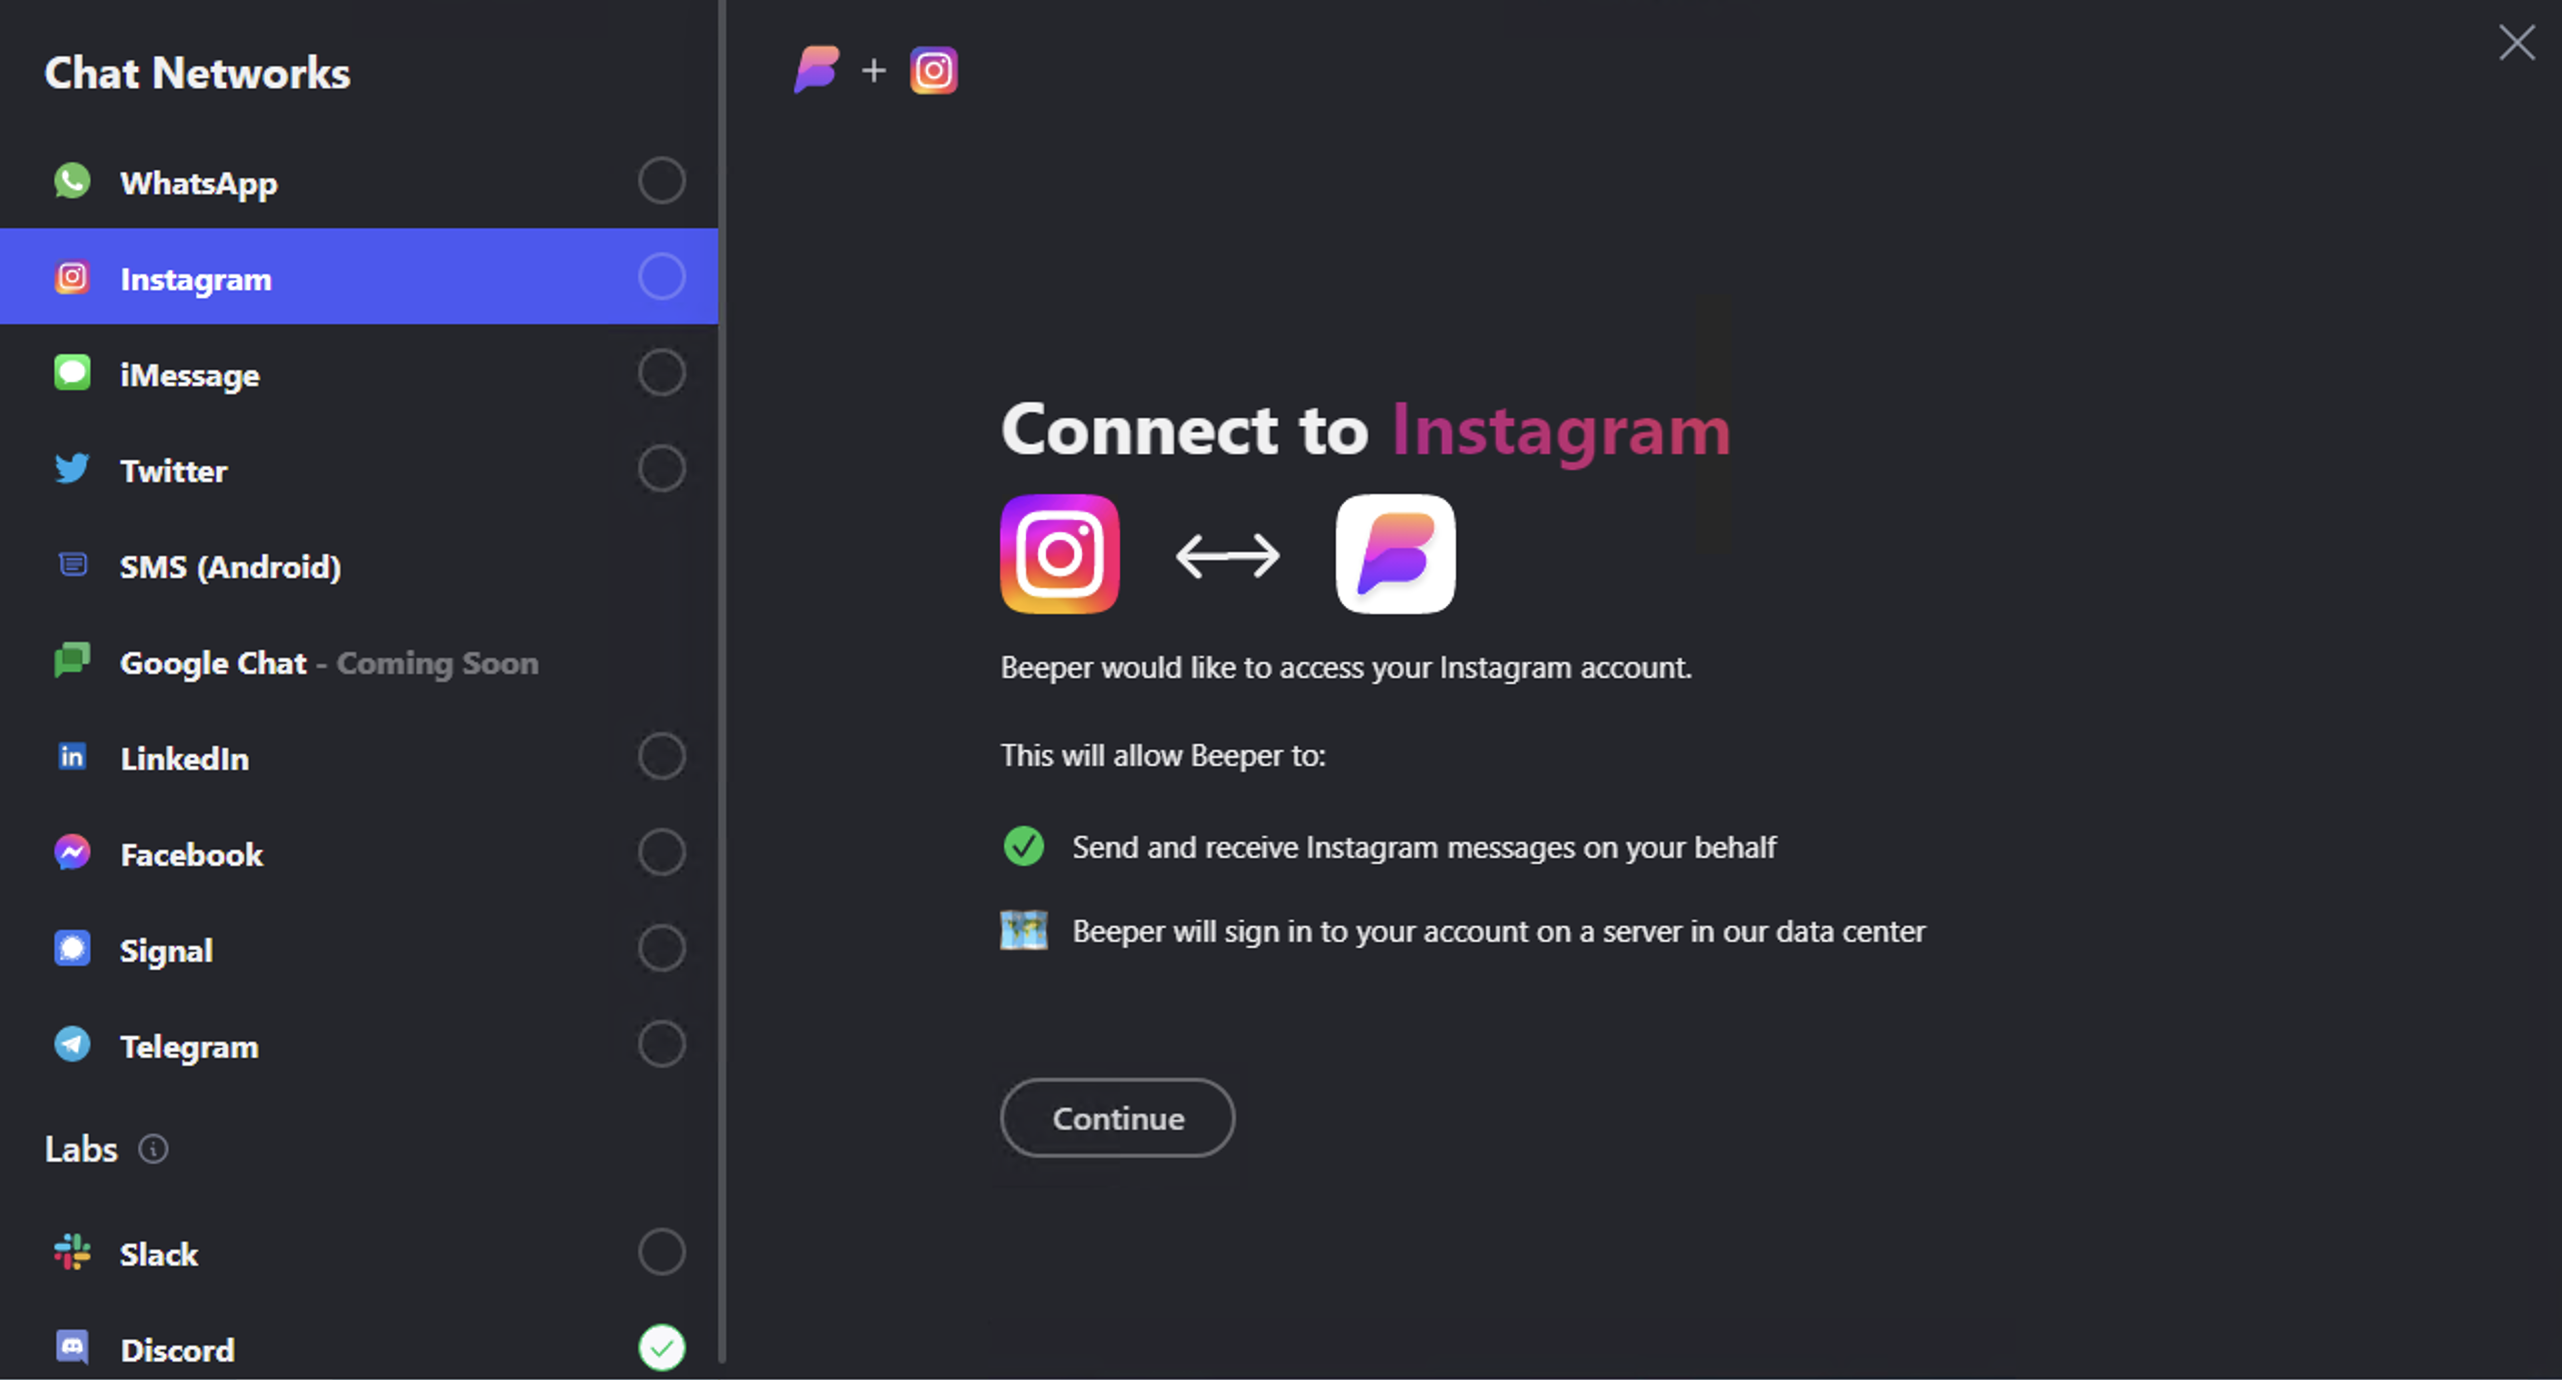 Unable to Login to Instagram using a Facebook account